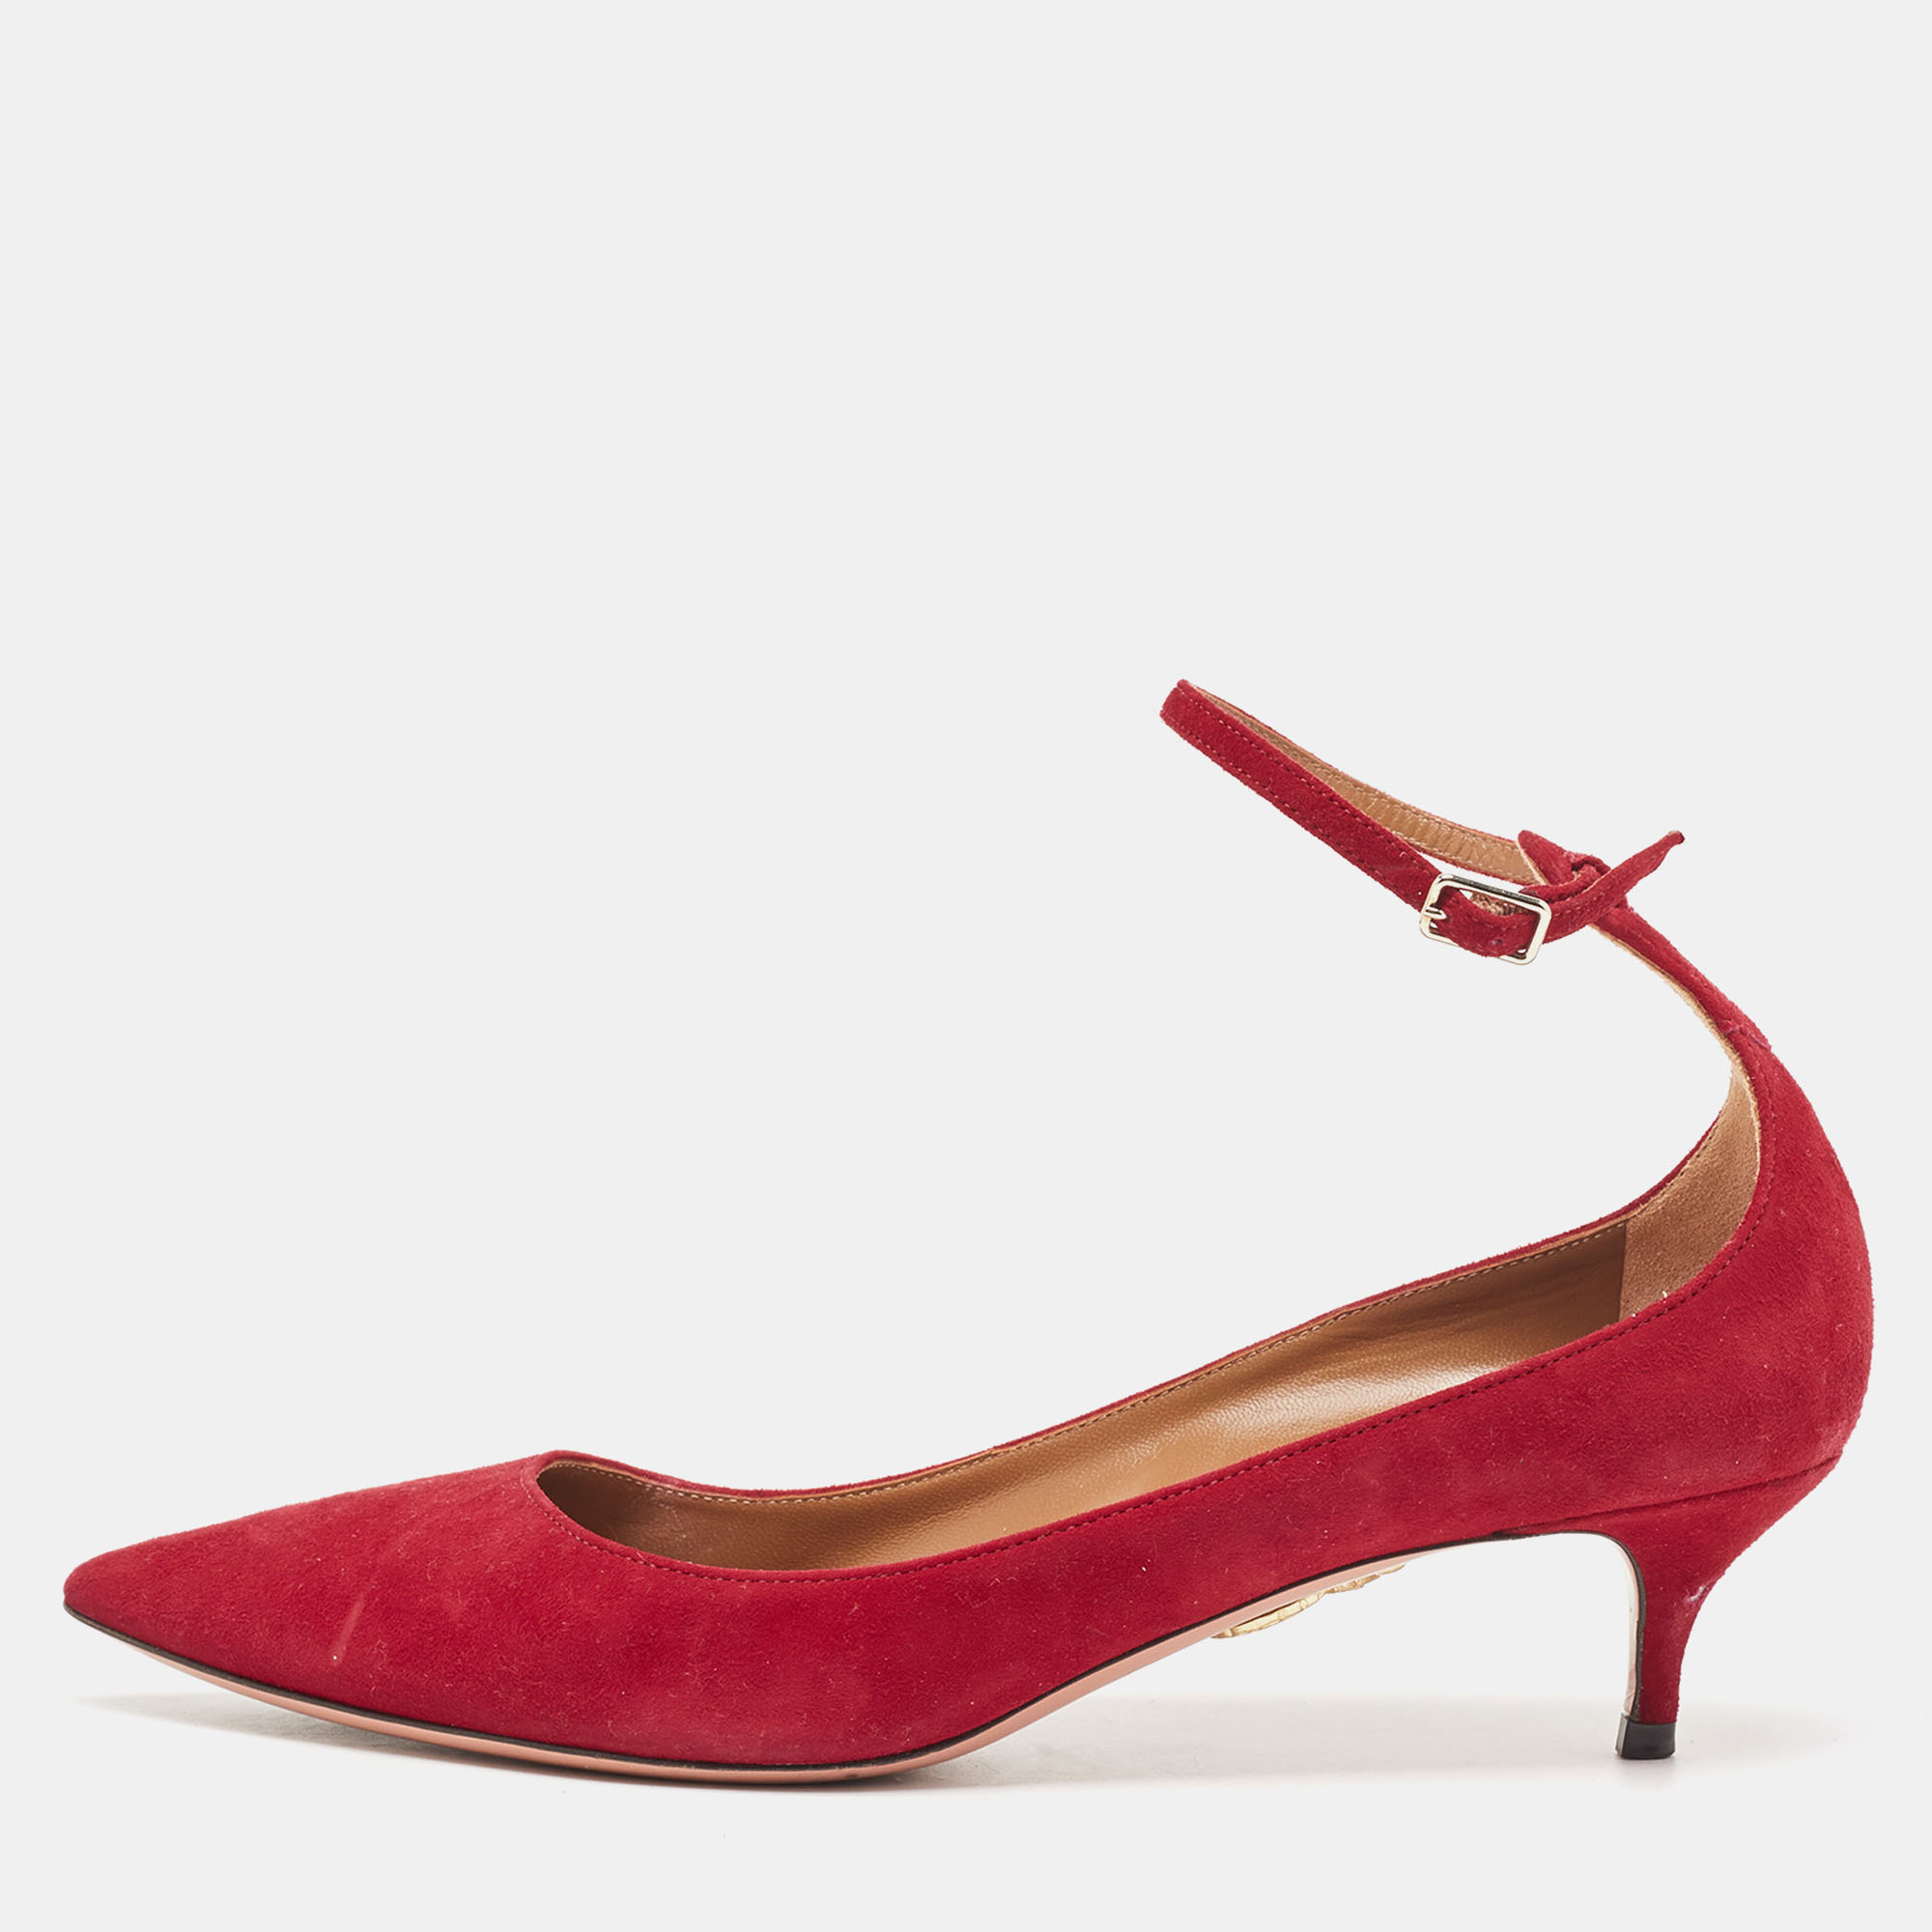 Pre-owned Aquazzura Red Suede Pointed Toe Pumps Size 37.5